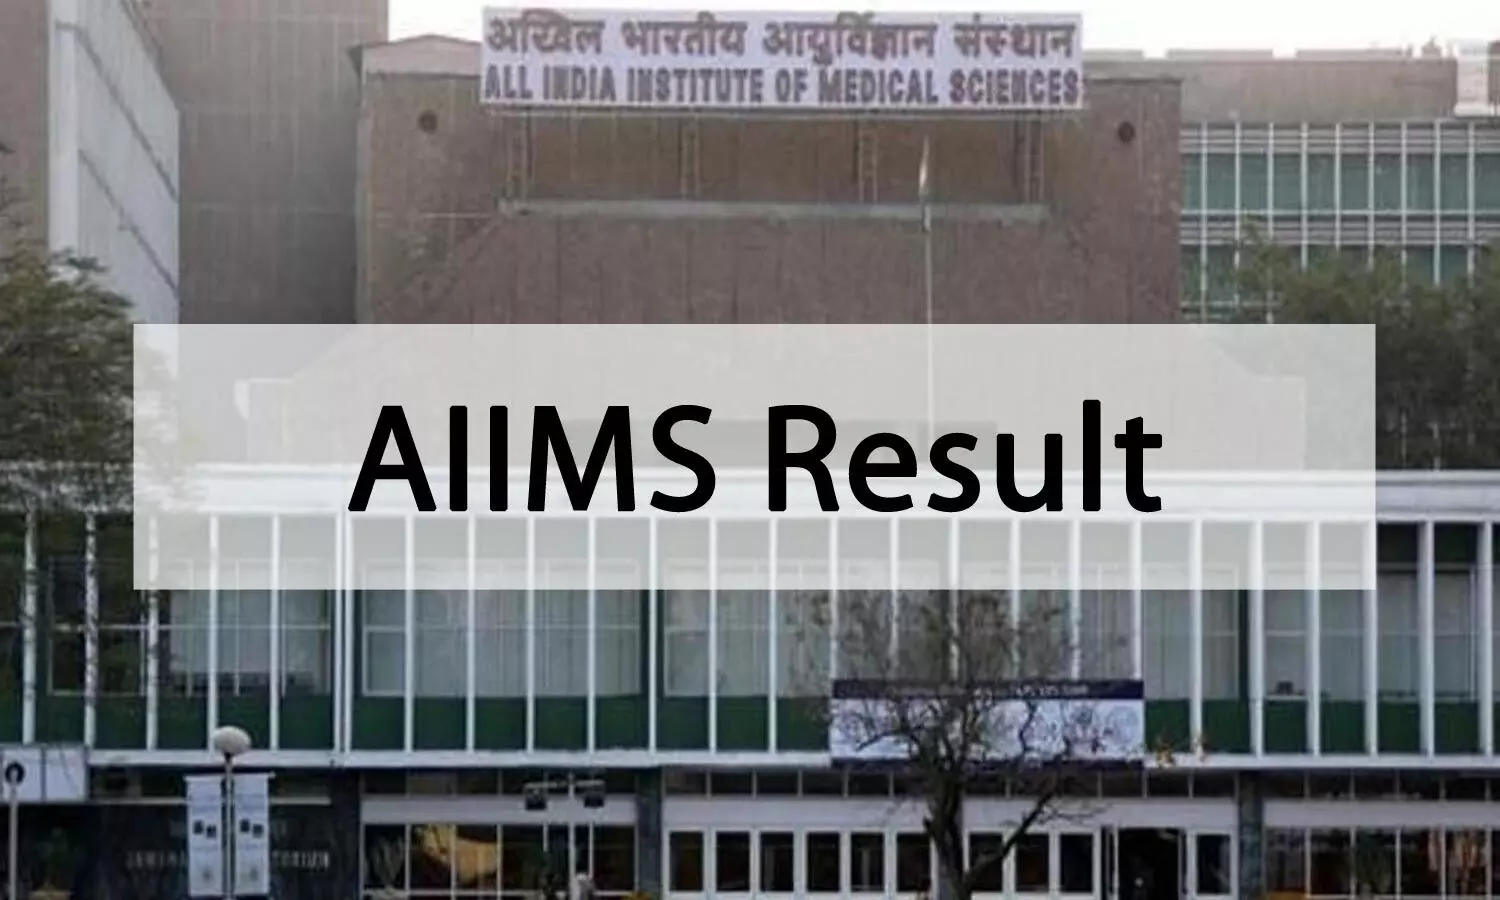 AIIMS PG 2020 July session: Round 3 Counselling results out, Details